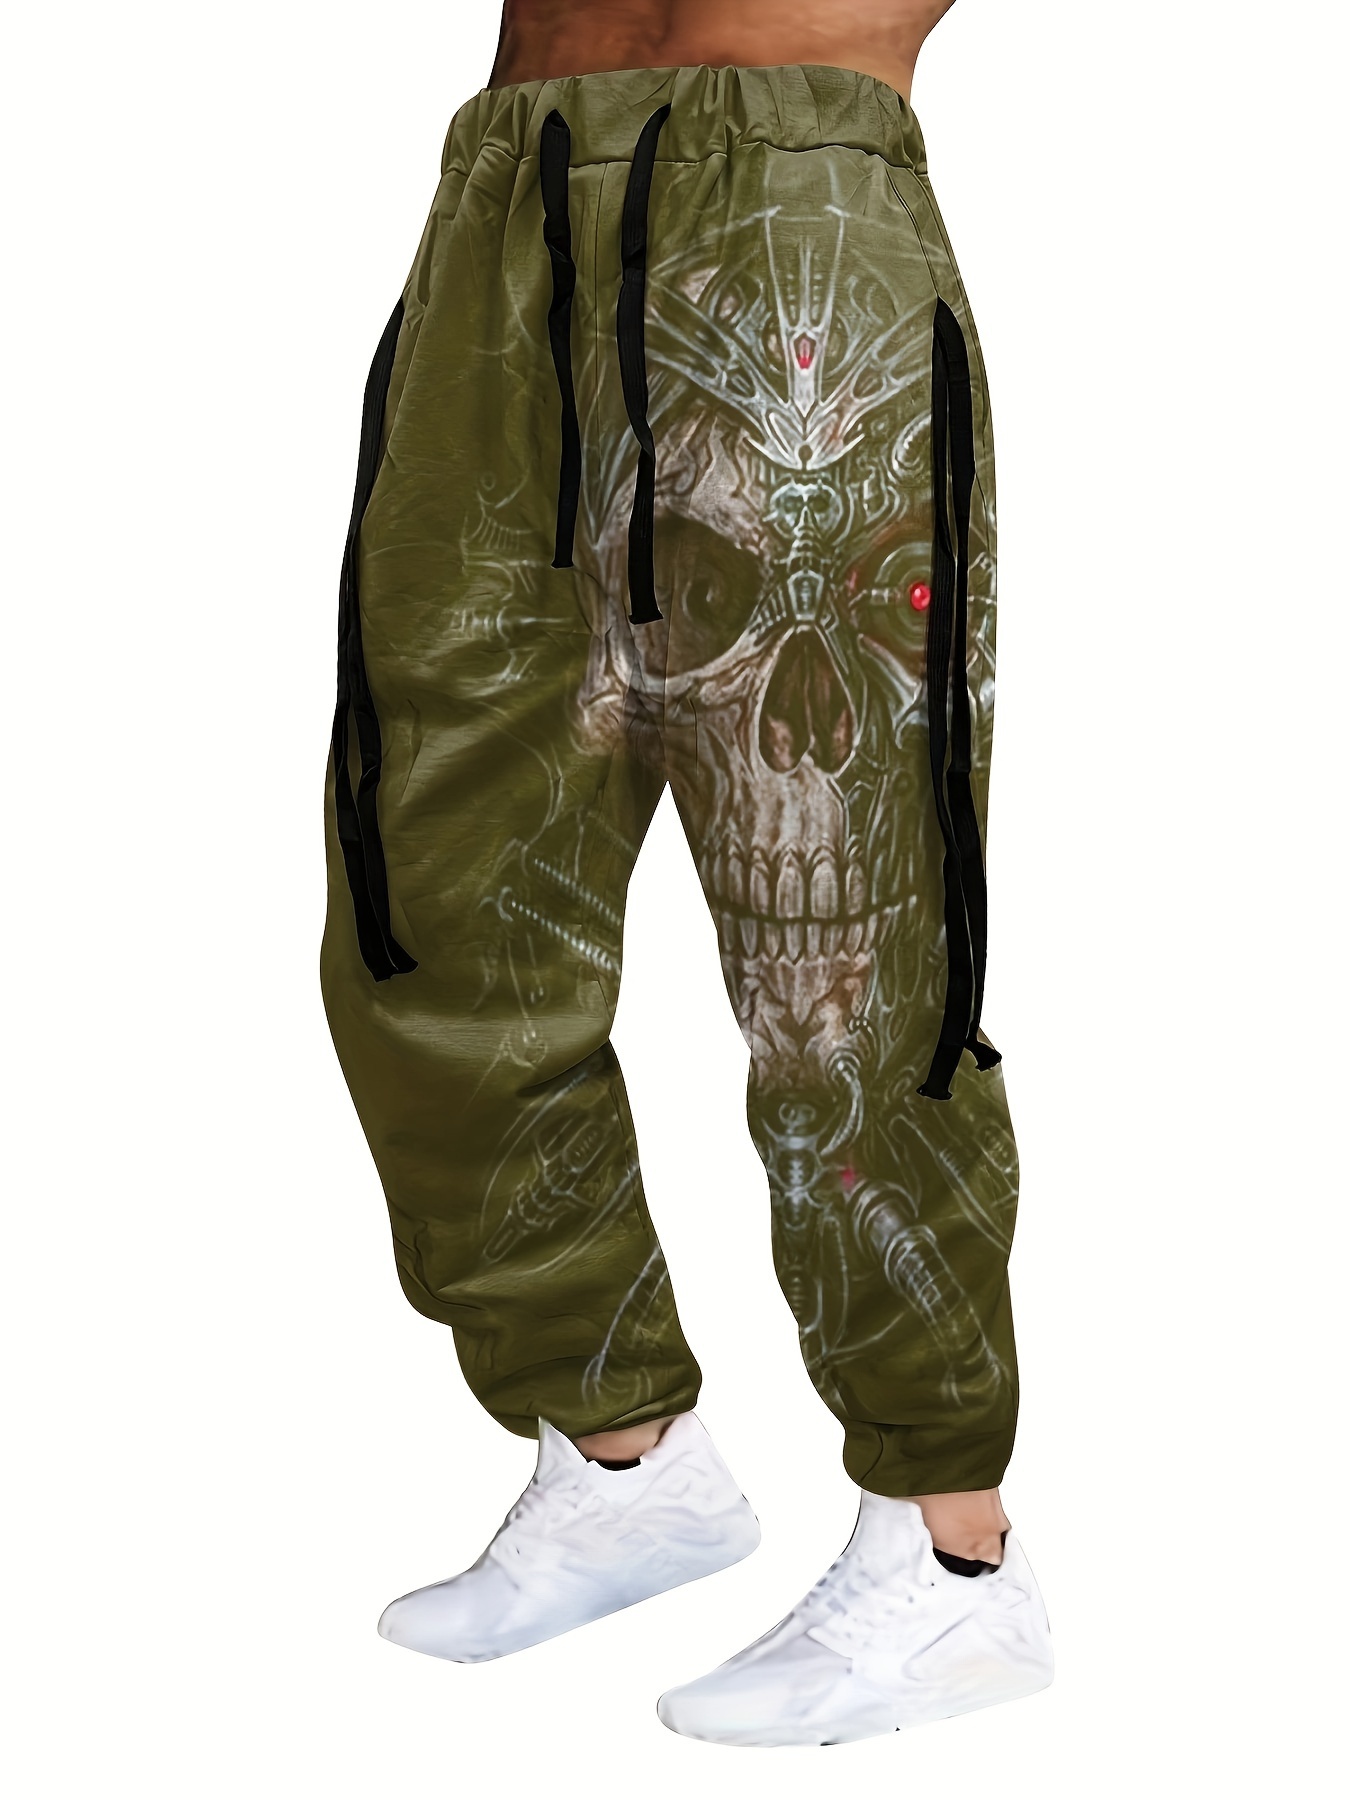  QIWCANM Human Skull with Eyes Front Print Sweatpants for Men  Lightweight Sport Casual Jogger Pants : Clothing, Shoes & Jewelry